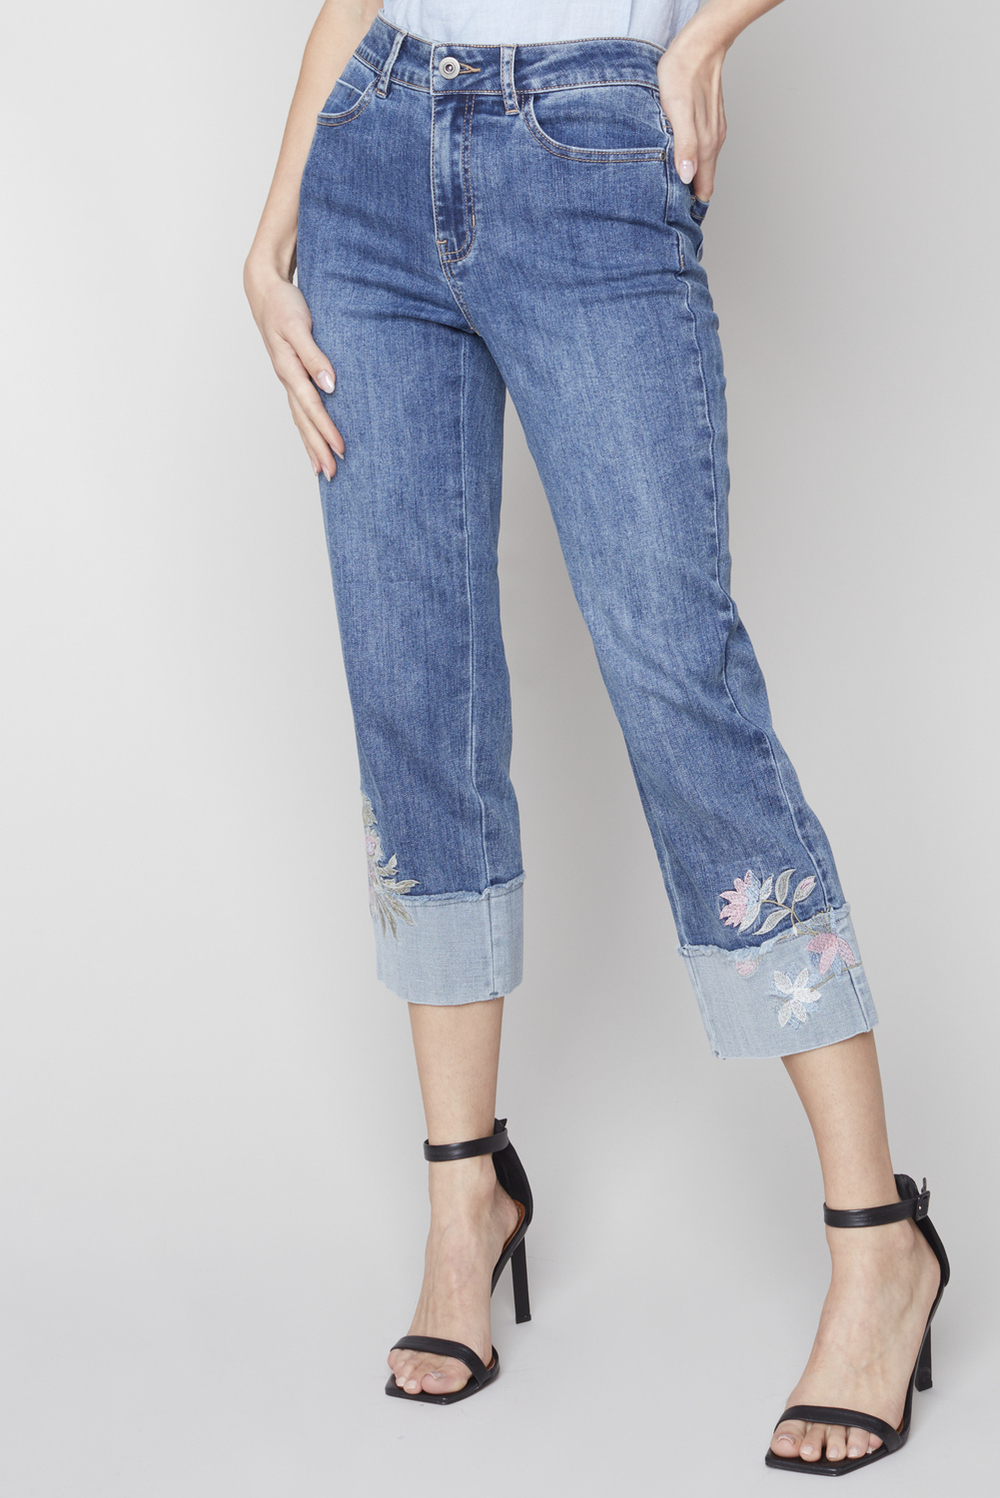 Embroidered Cuff Jeans Style C5399. Medium Blue